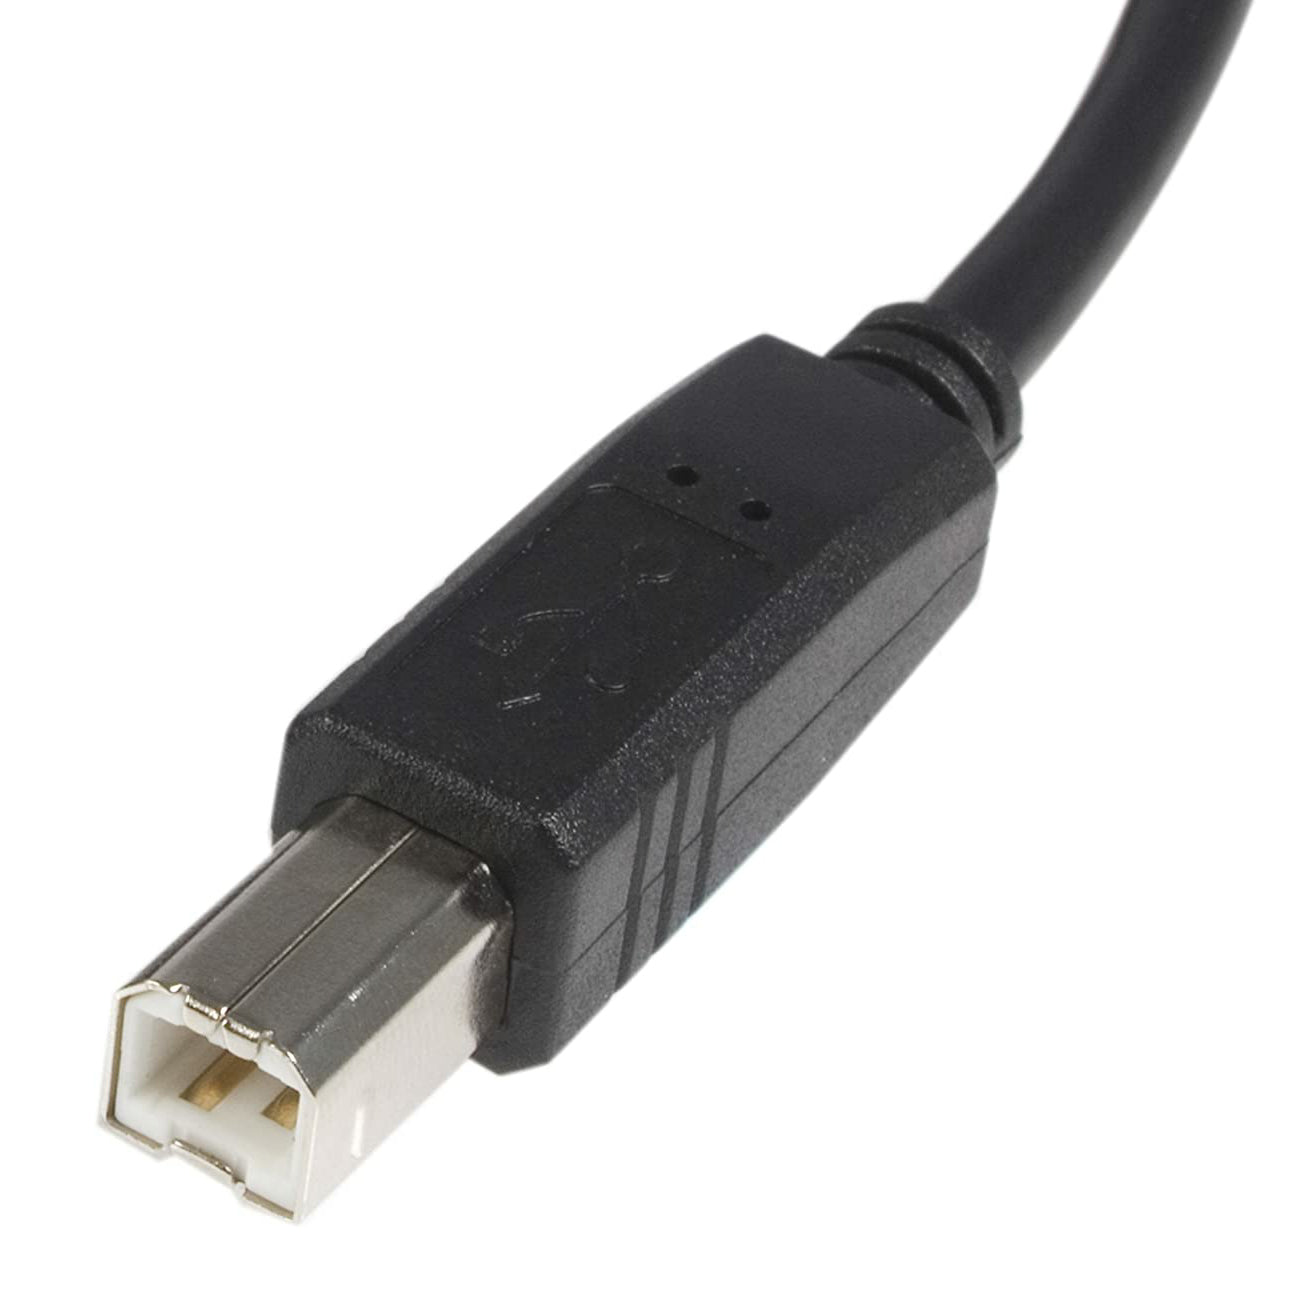 USB 2.0 A Male to B Male Cable 1 Meter Long